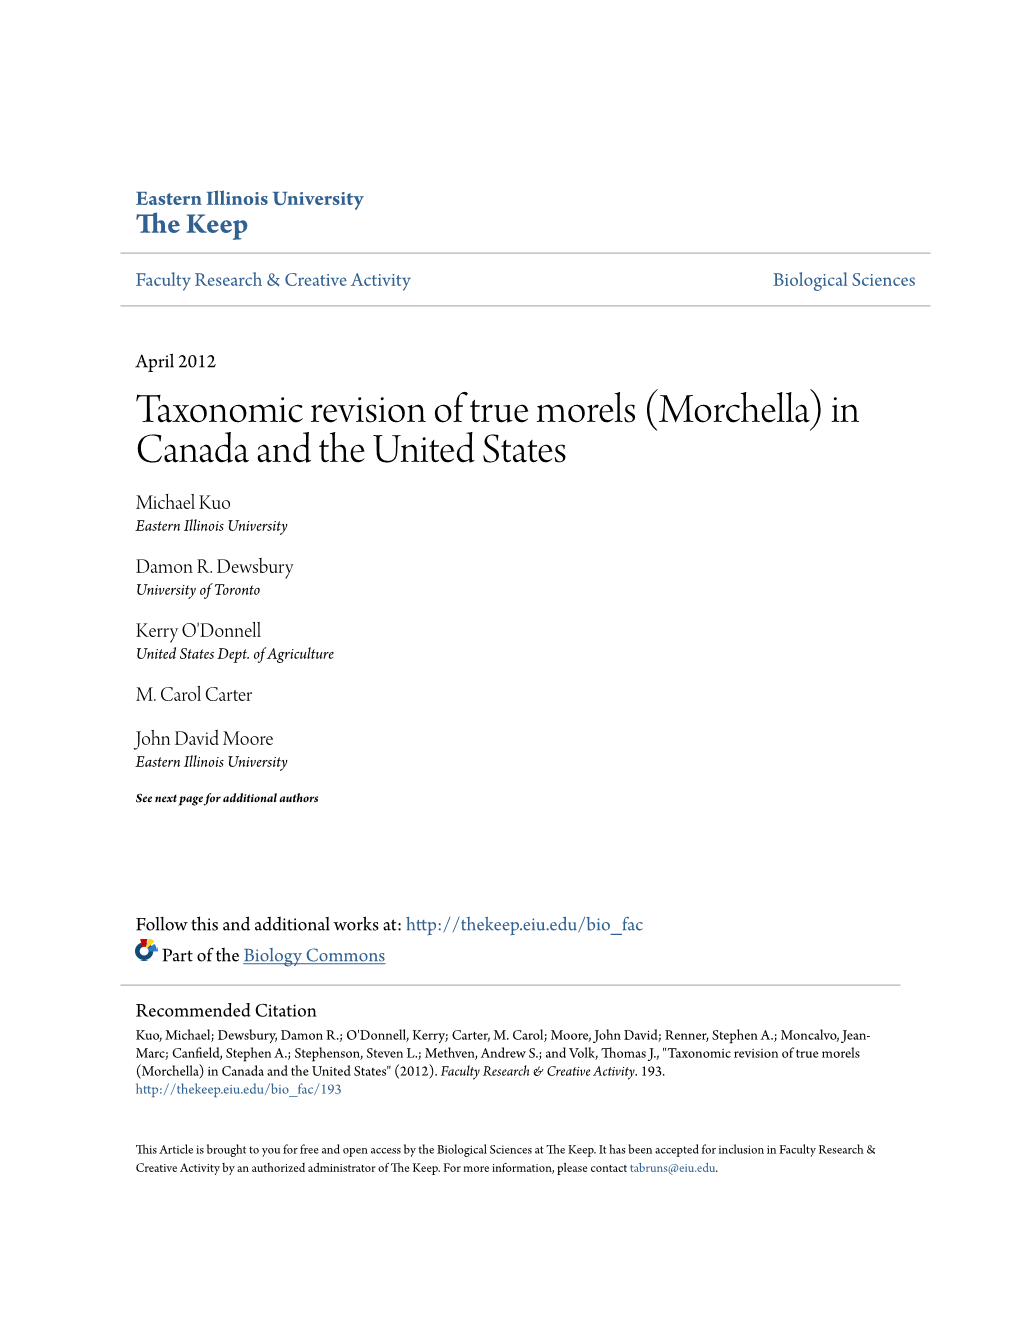 Taxonomic Revision of True Morels (Morchella) in Canada and the United States Michael Kuo Eastern Illinois University